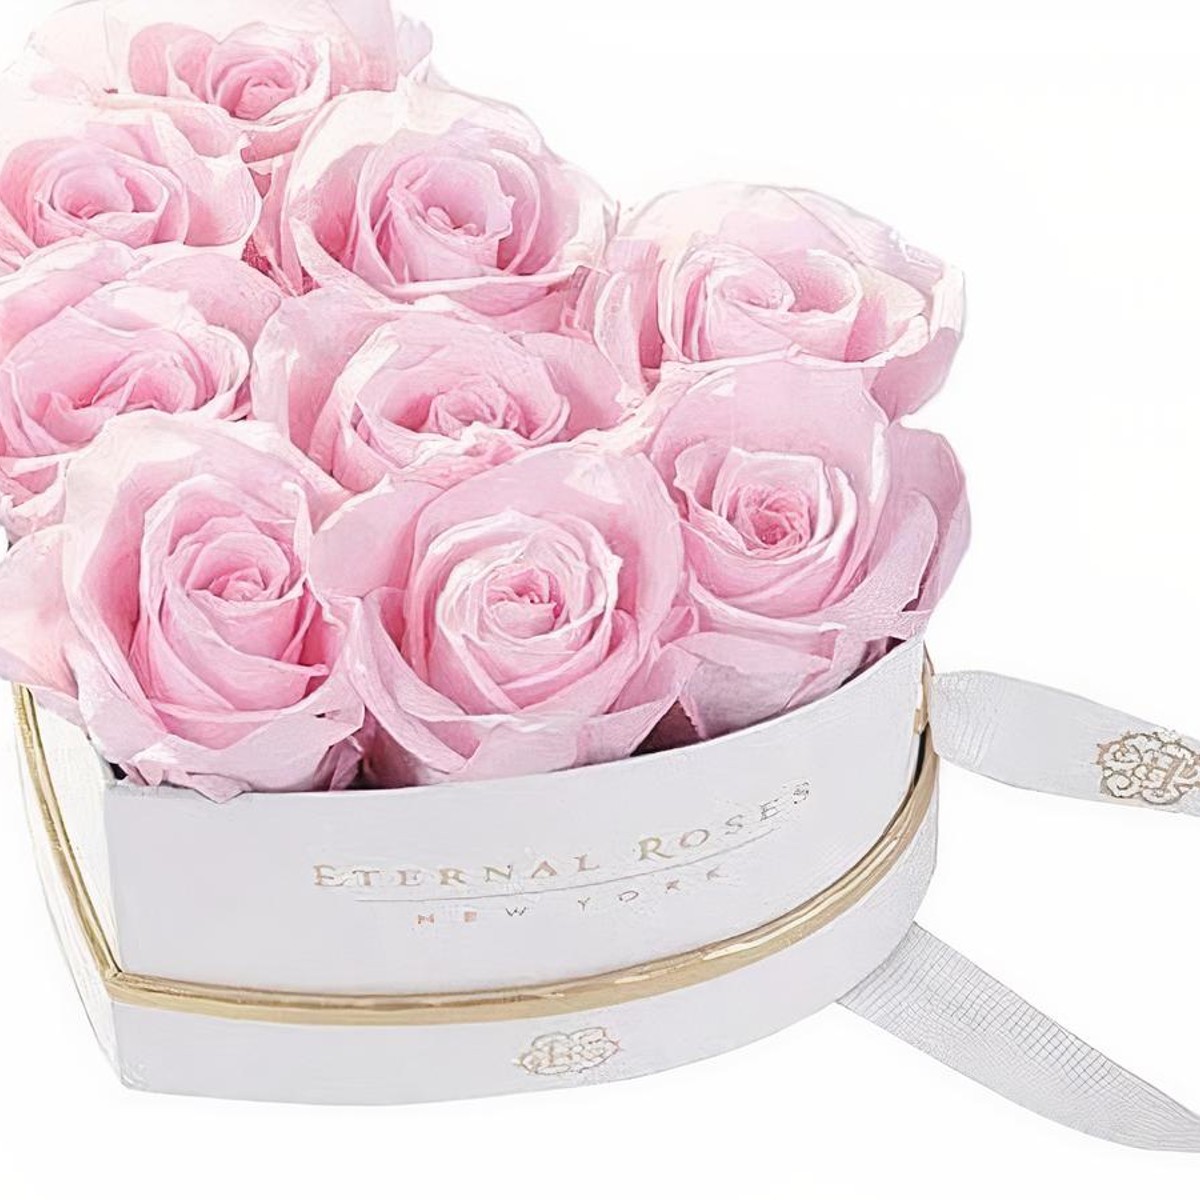 Preserved Eternal Real Rose Flower Gift Box With 14K Gold Plated